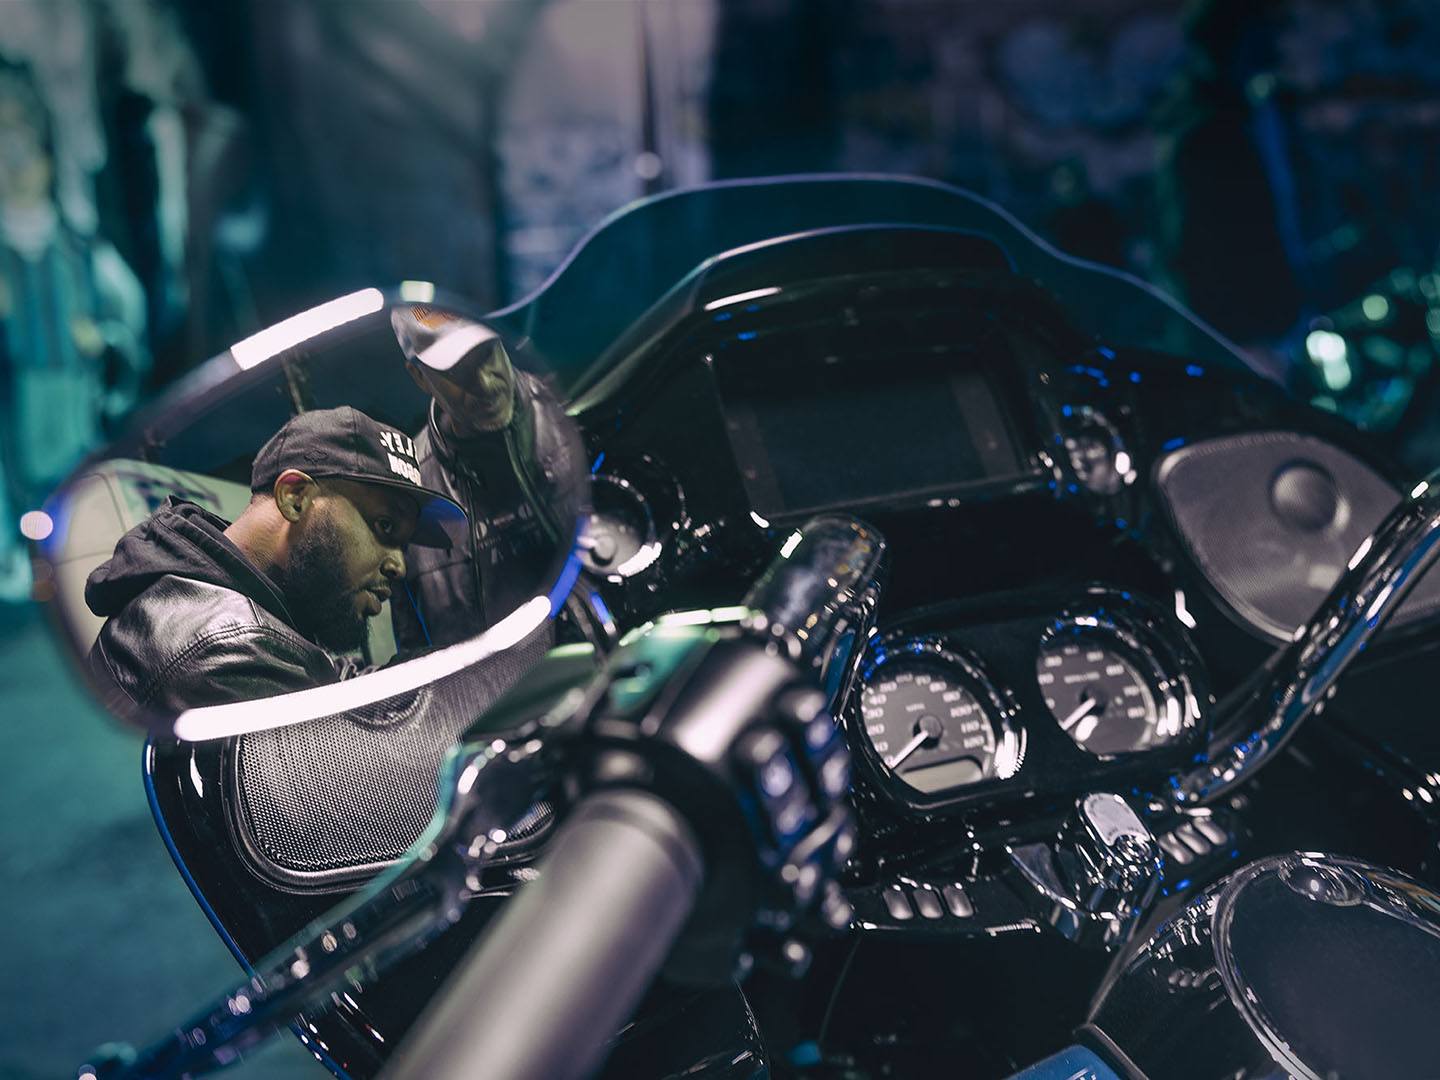 2023 Harley-Davidson Road Glide® 3 in New London, Connecticut - Photo 4